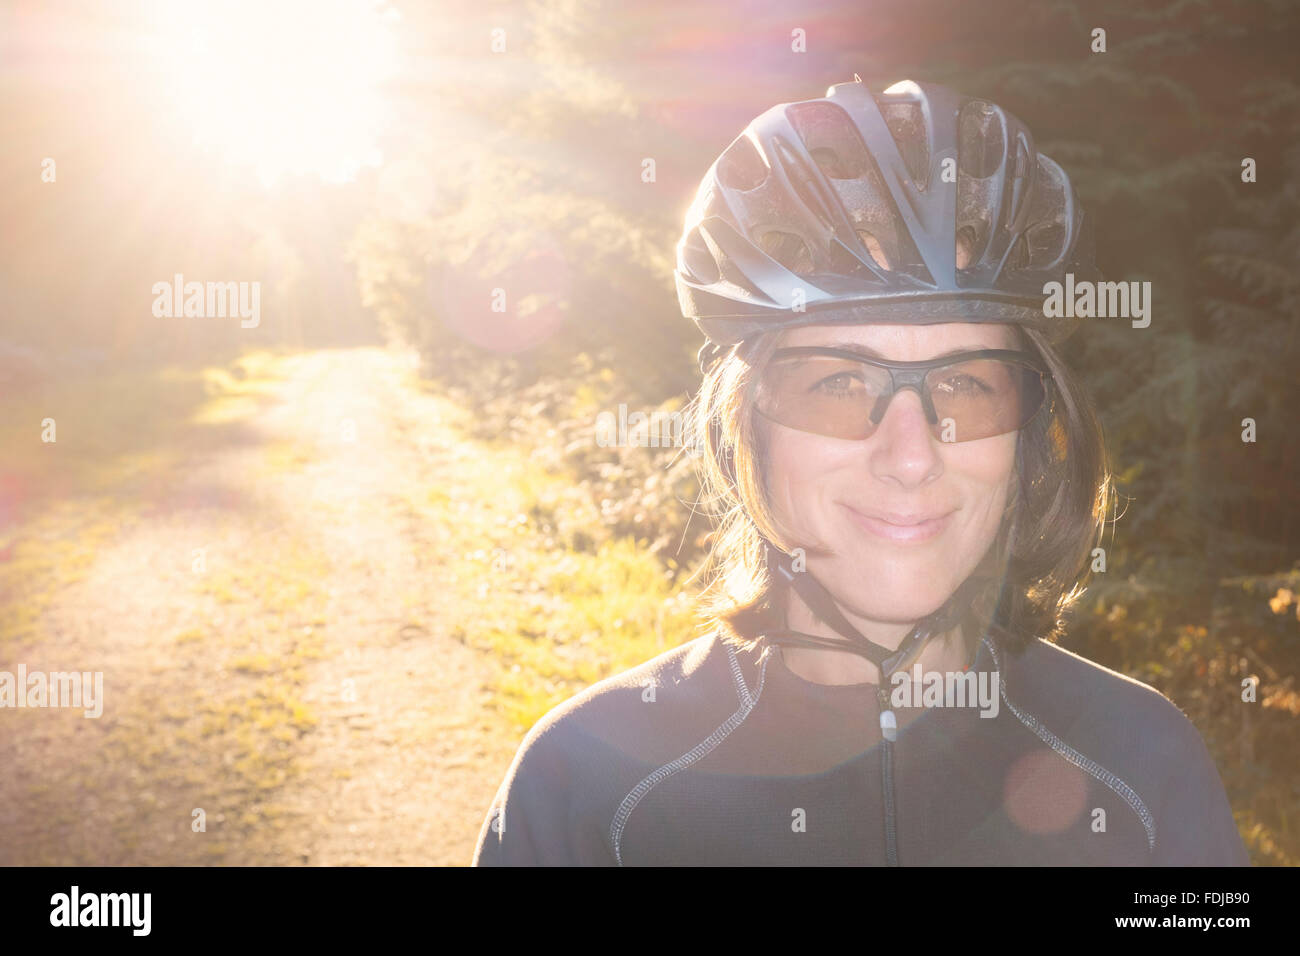 Female mountain biker in the forest. Stock Photo